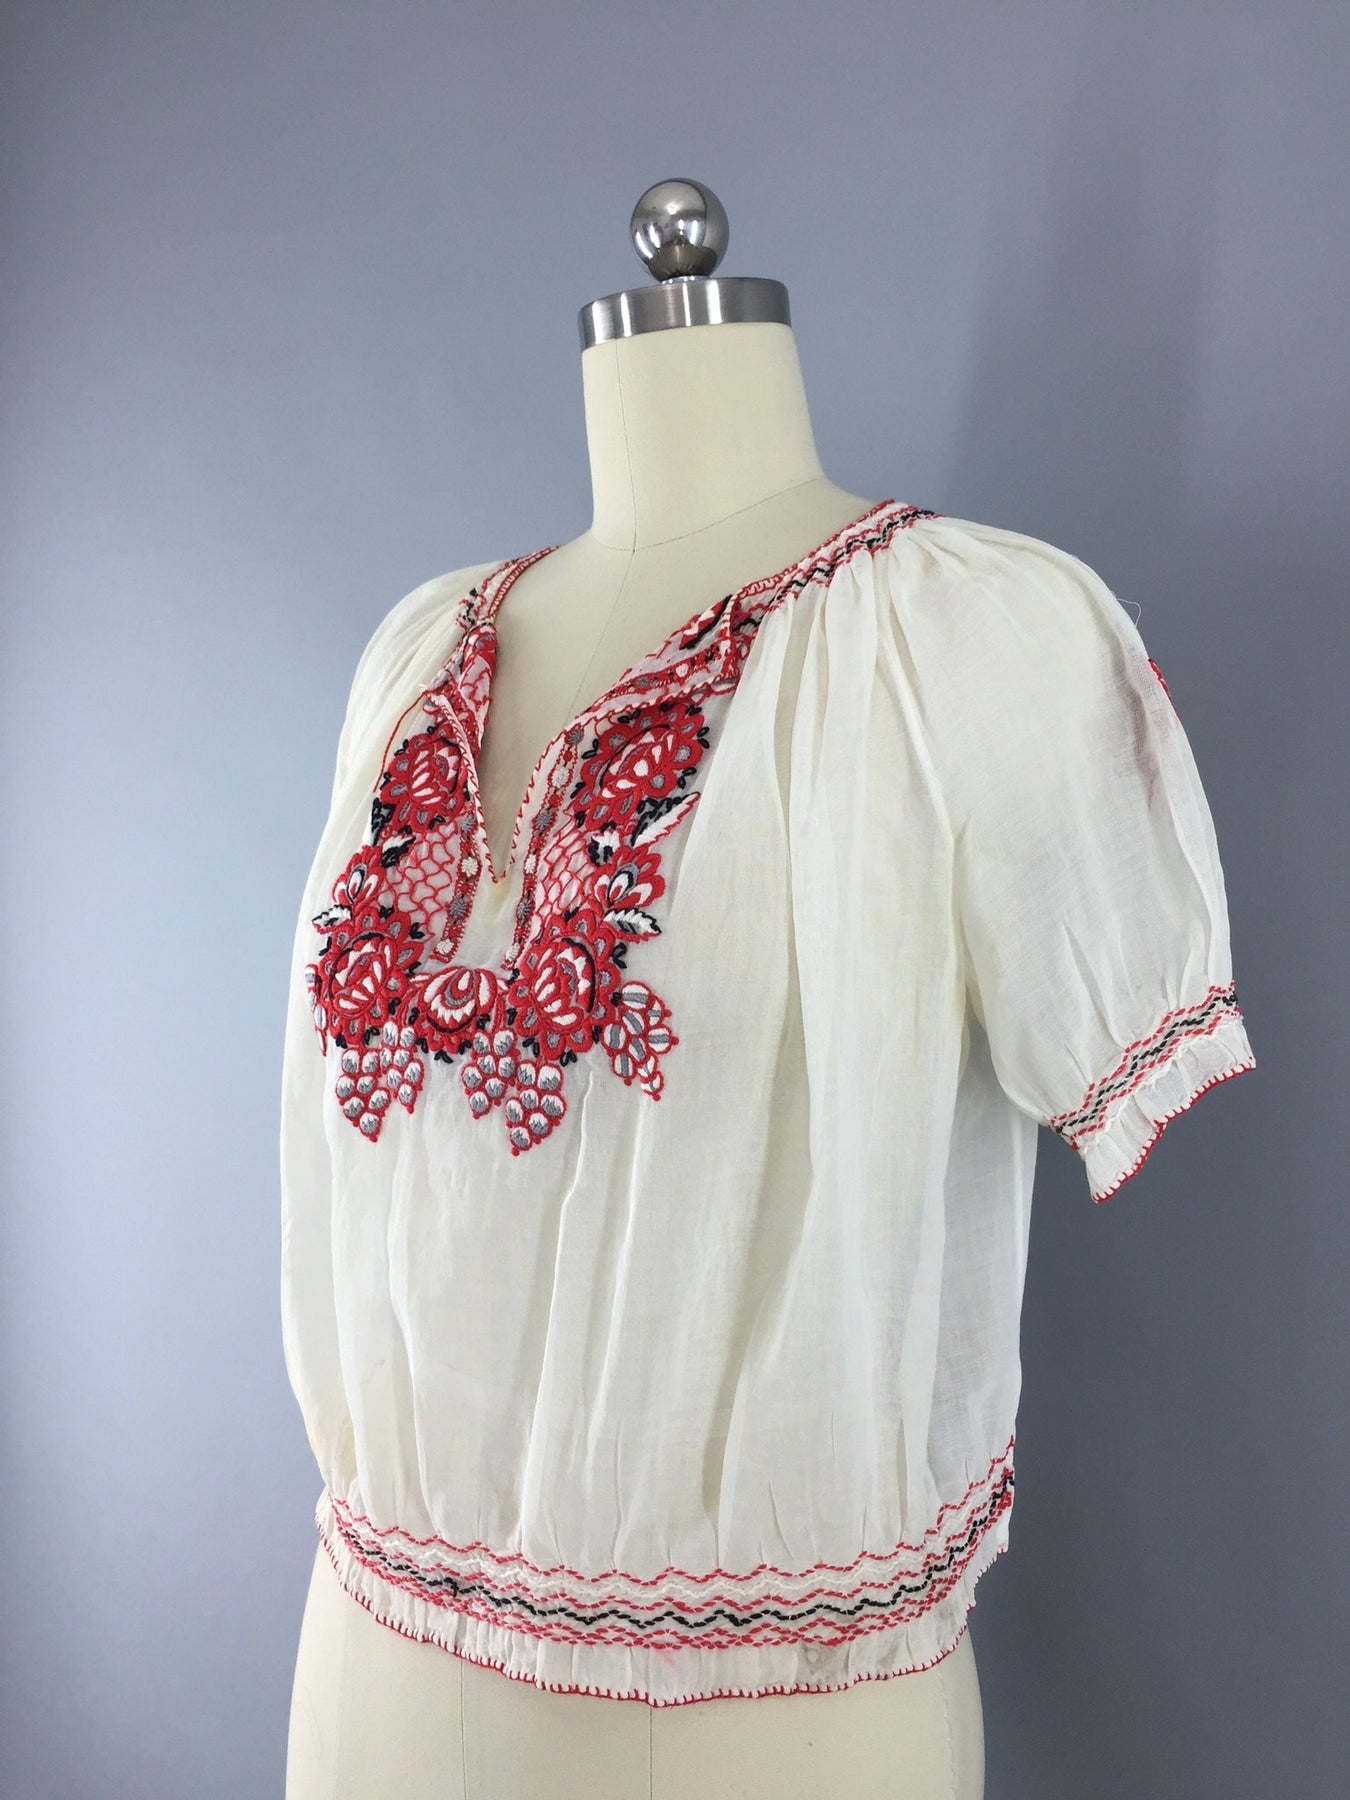 Vintage 1930s Peasant Blouse / Hungarian Embroidered – ThisBlueBird